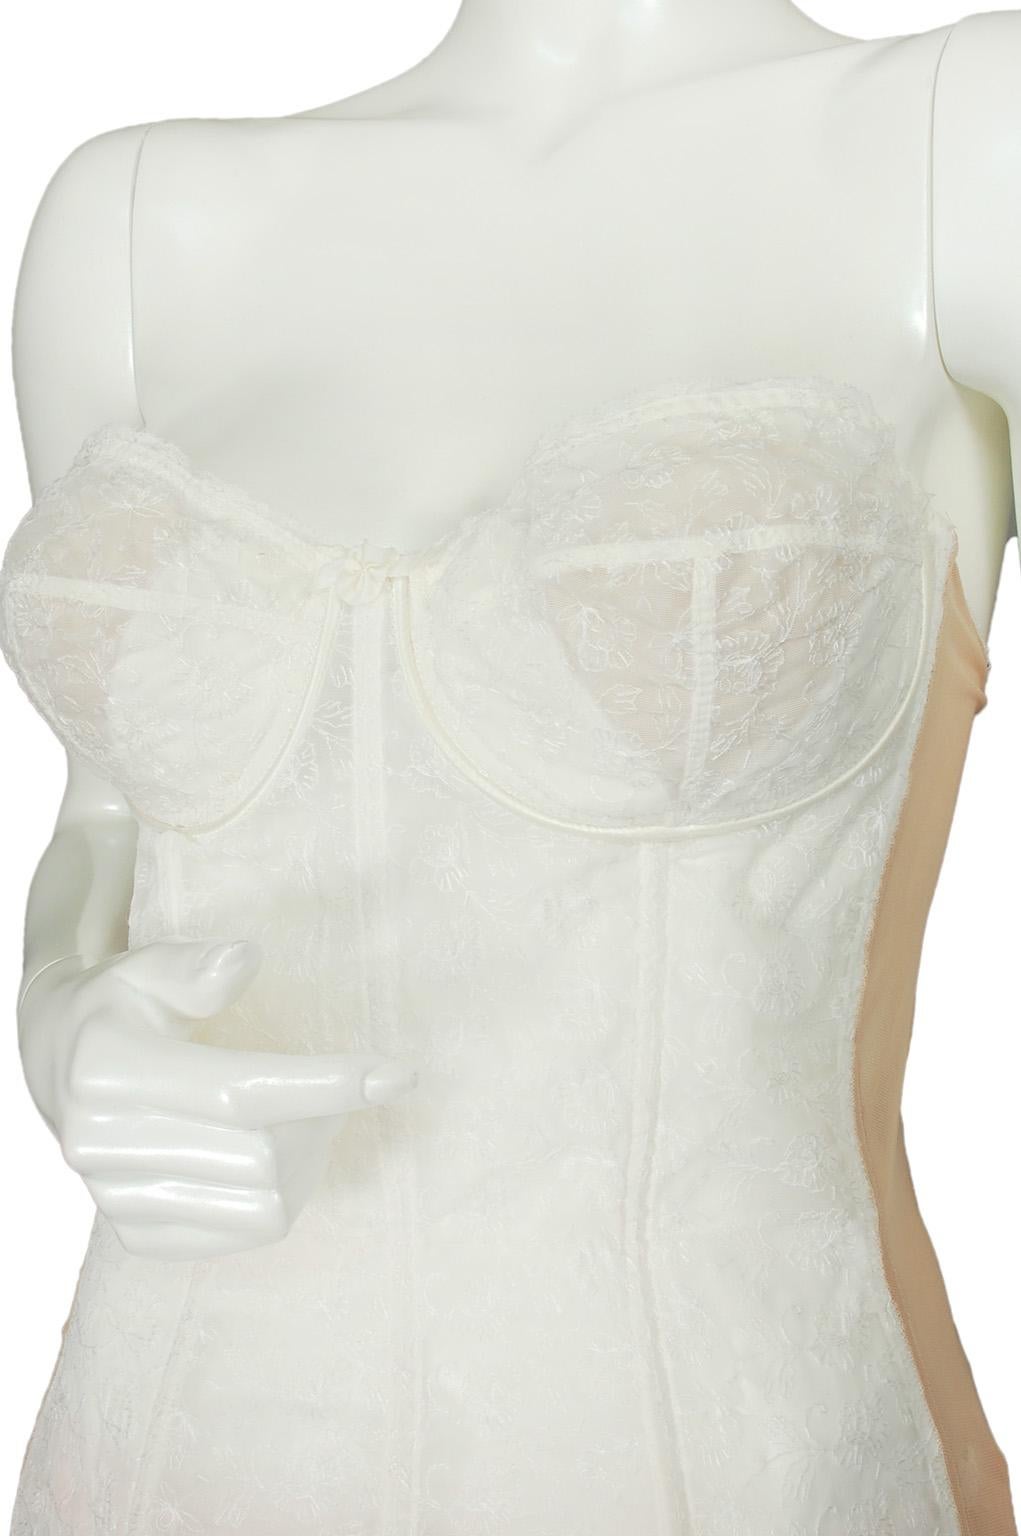 Gray Sheer Ivory Embroidered Wedding Bustier Corset w Garter Straps – 38-44C, 1950s For Sale